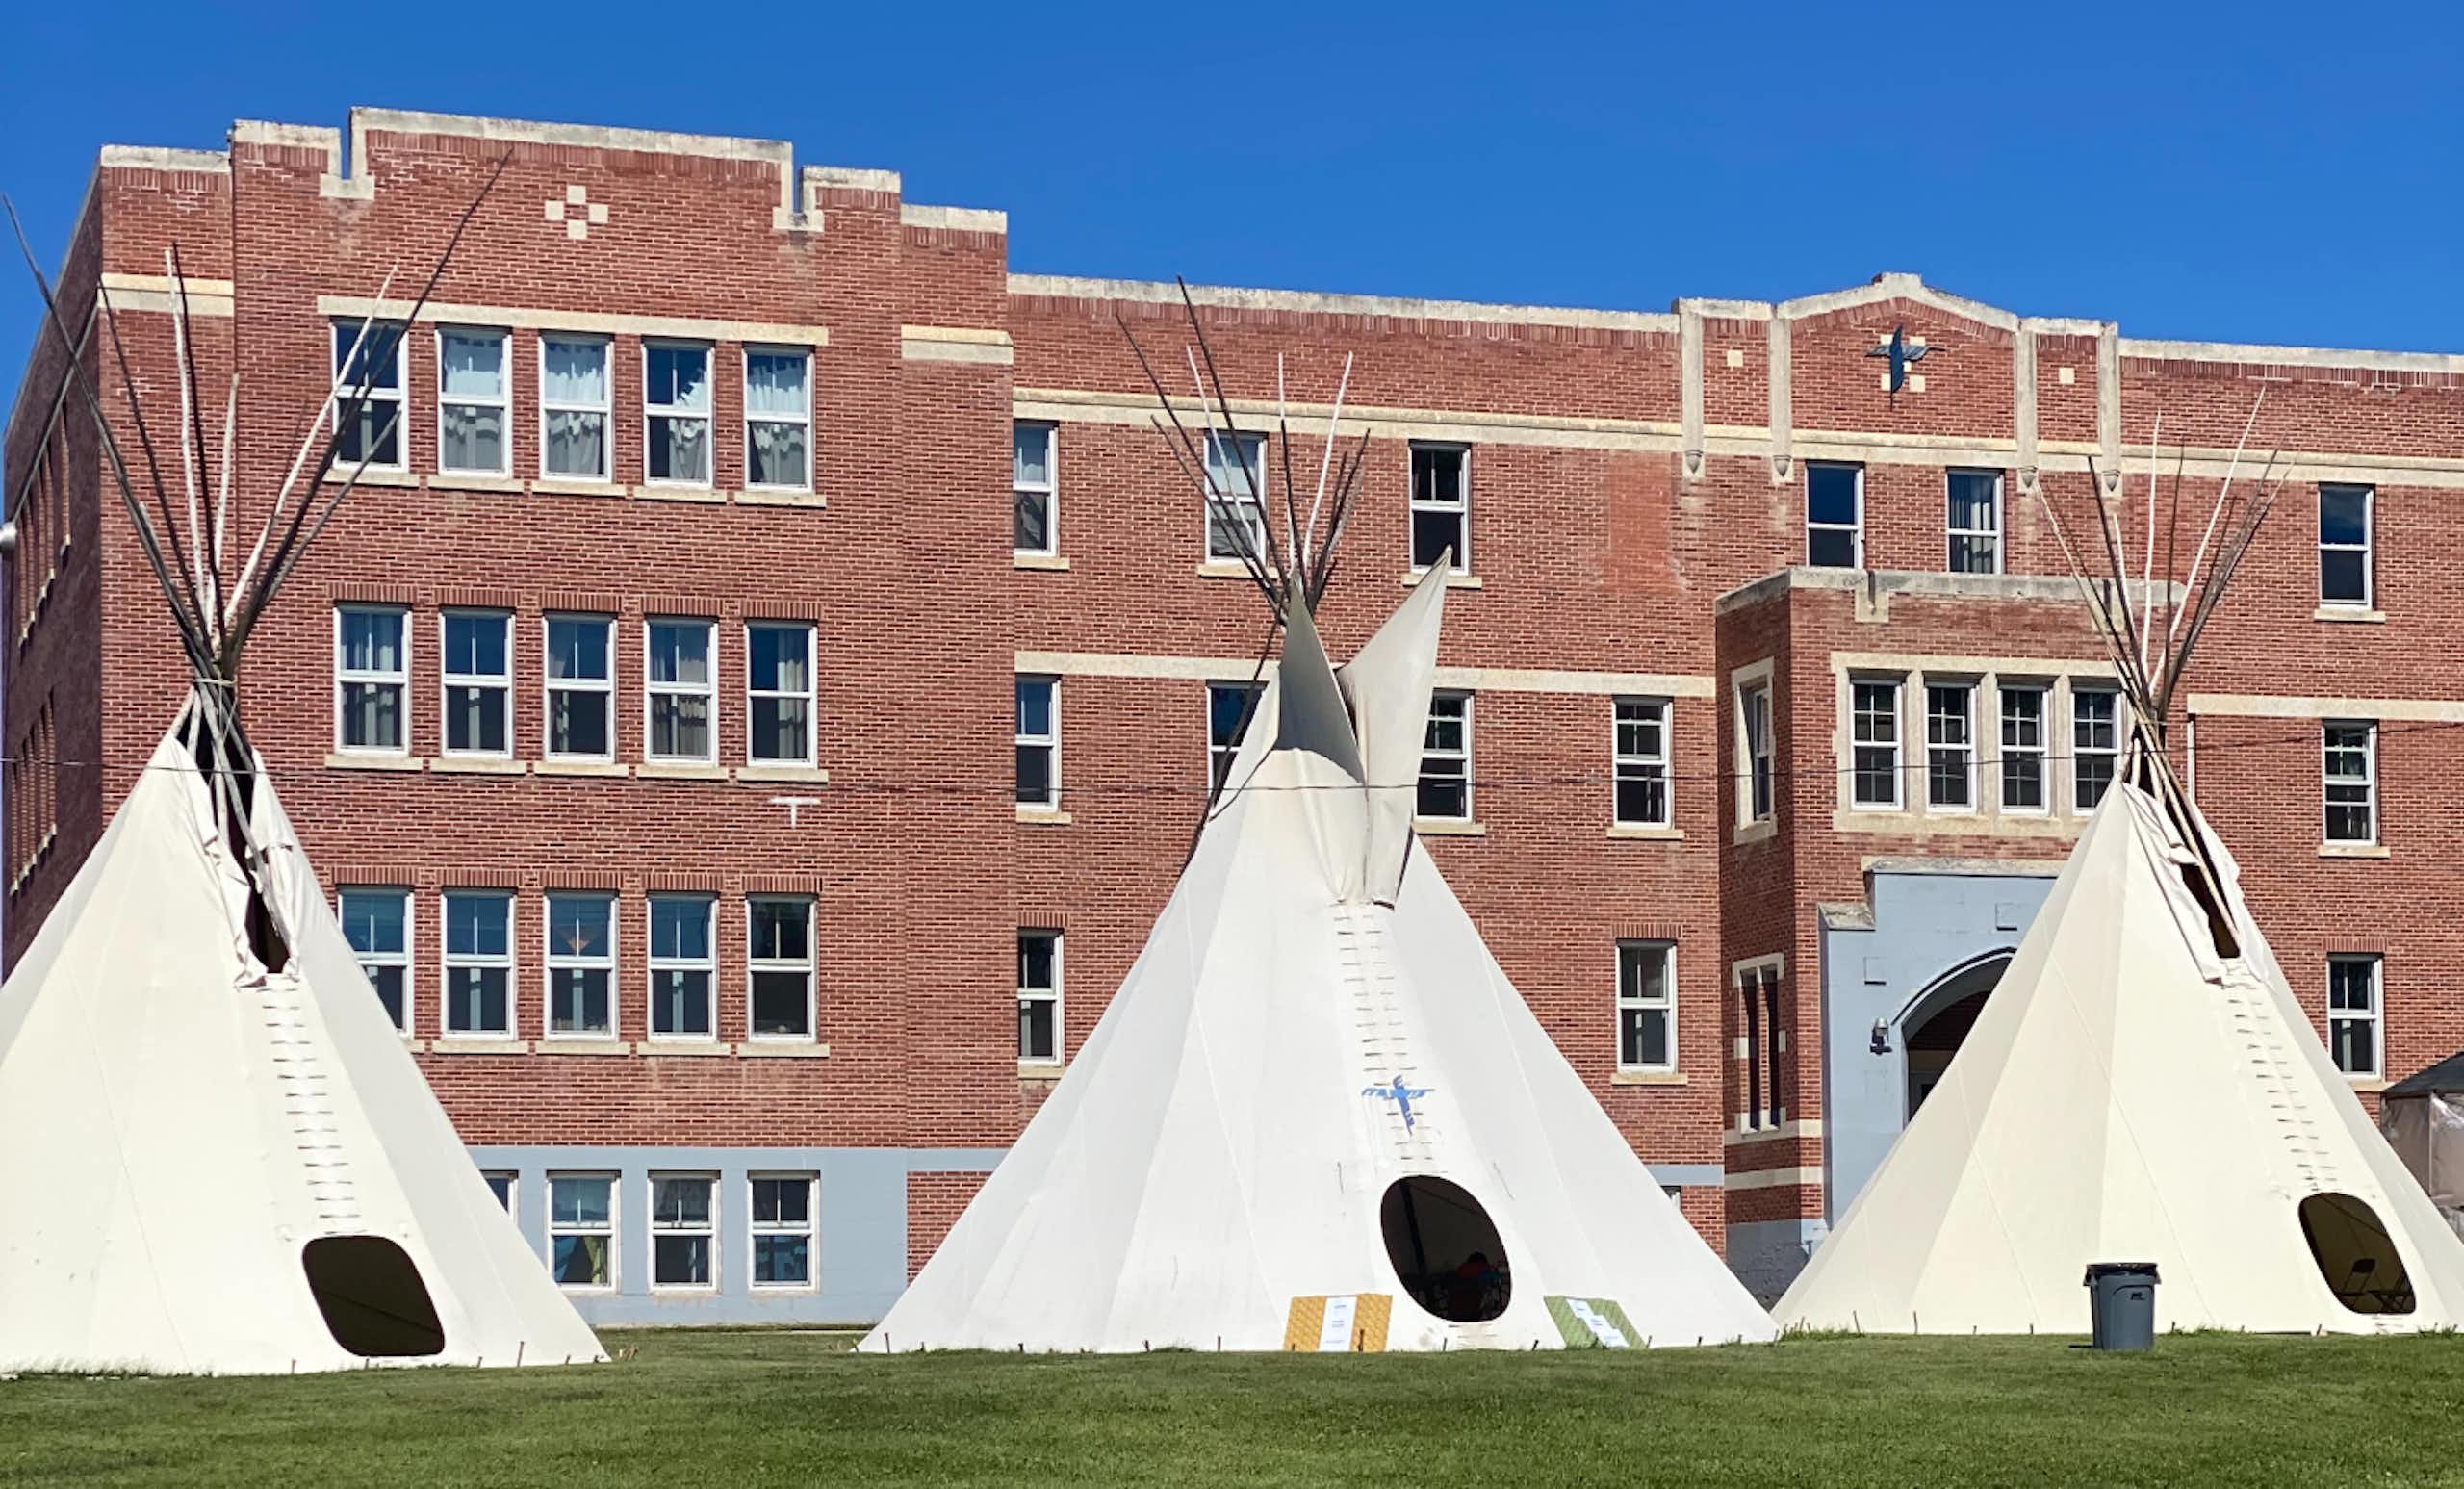 Three white tipis outside a brown stone building